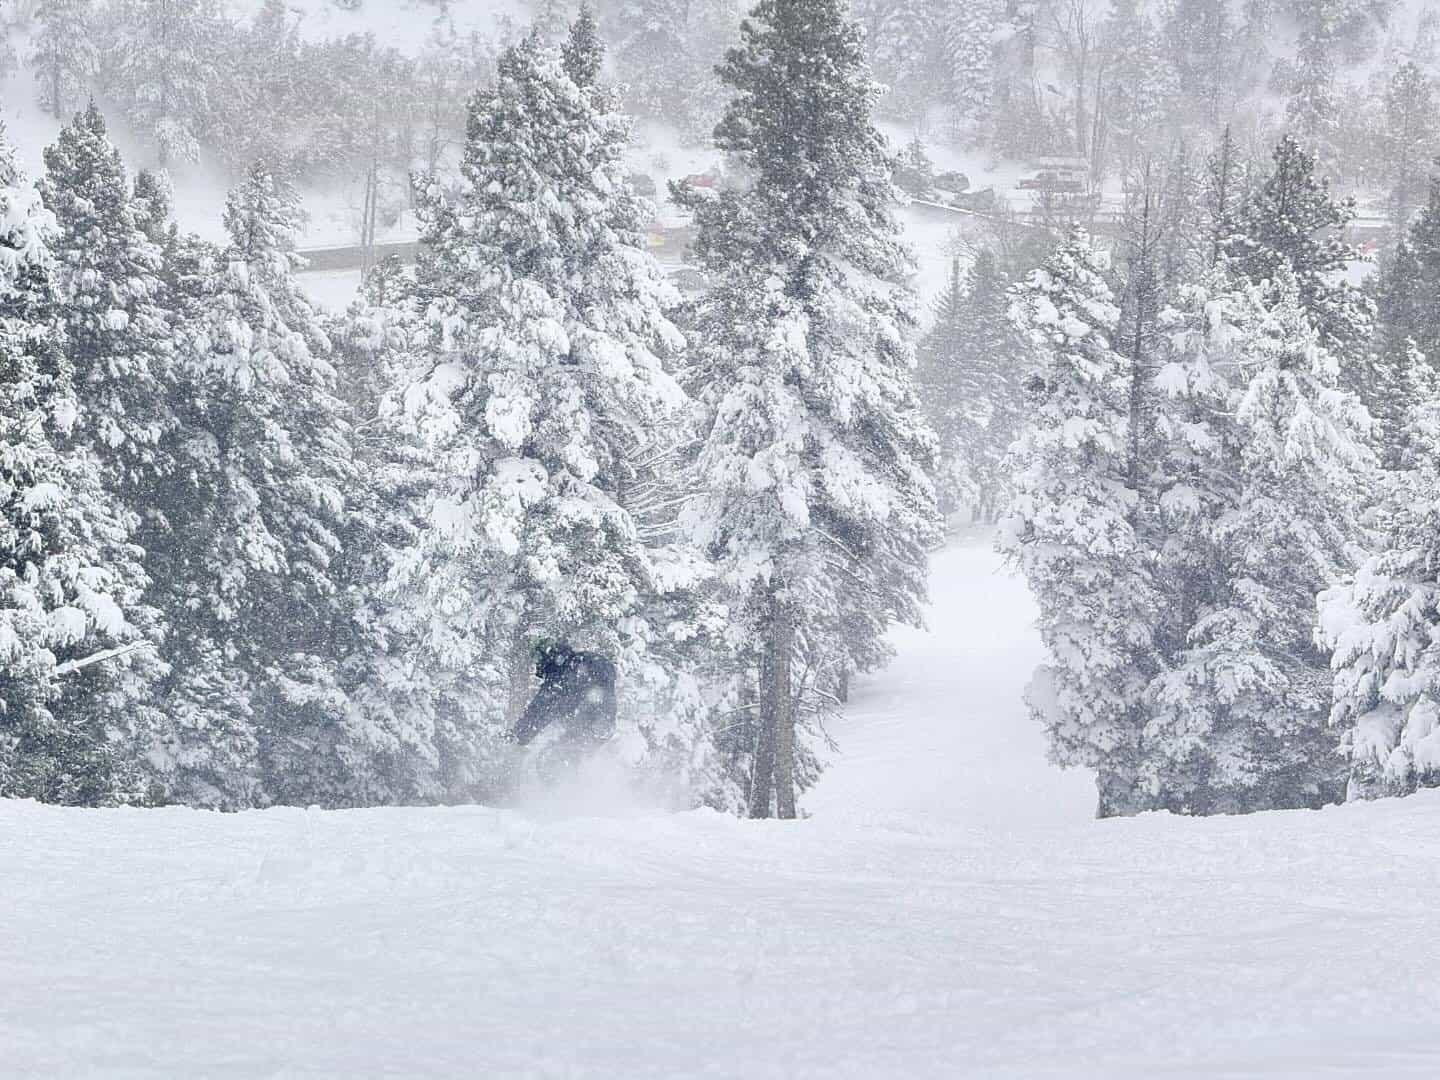 snowboarder in deep snow at snowy sipapu ski resort New Mexico